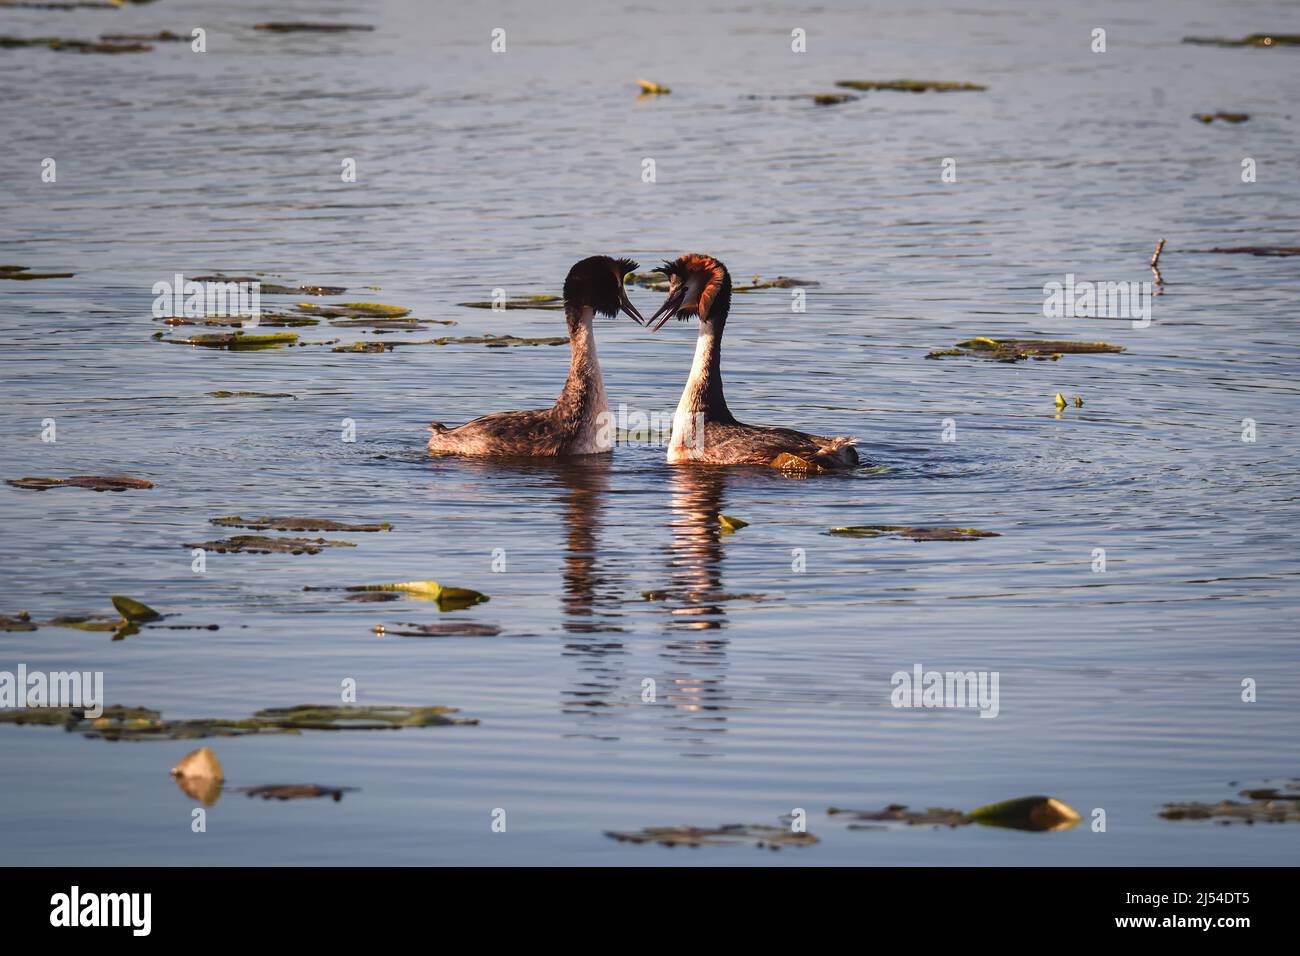 Phenomenal lake scene with animals. Pair of ducks with their beaks towards each other. Stock Photo